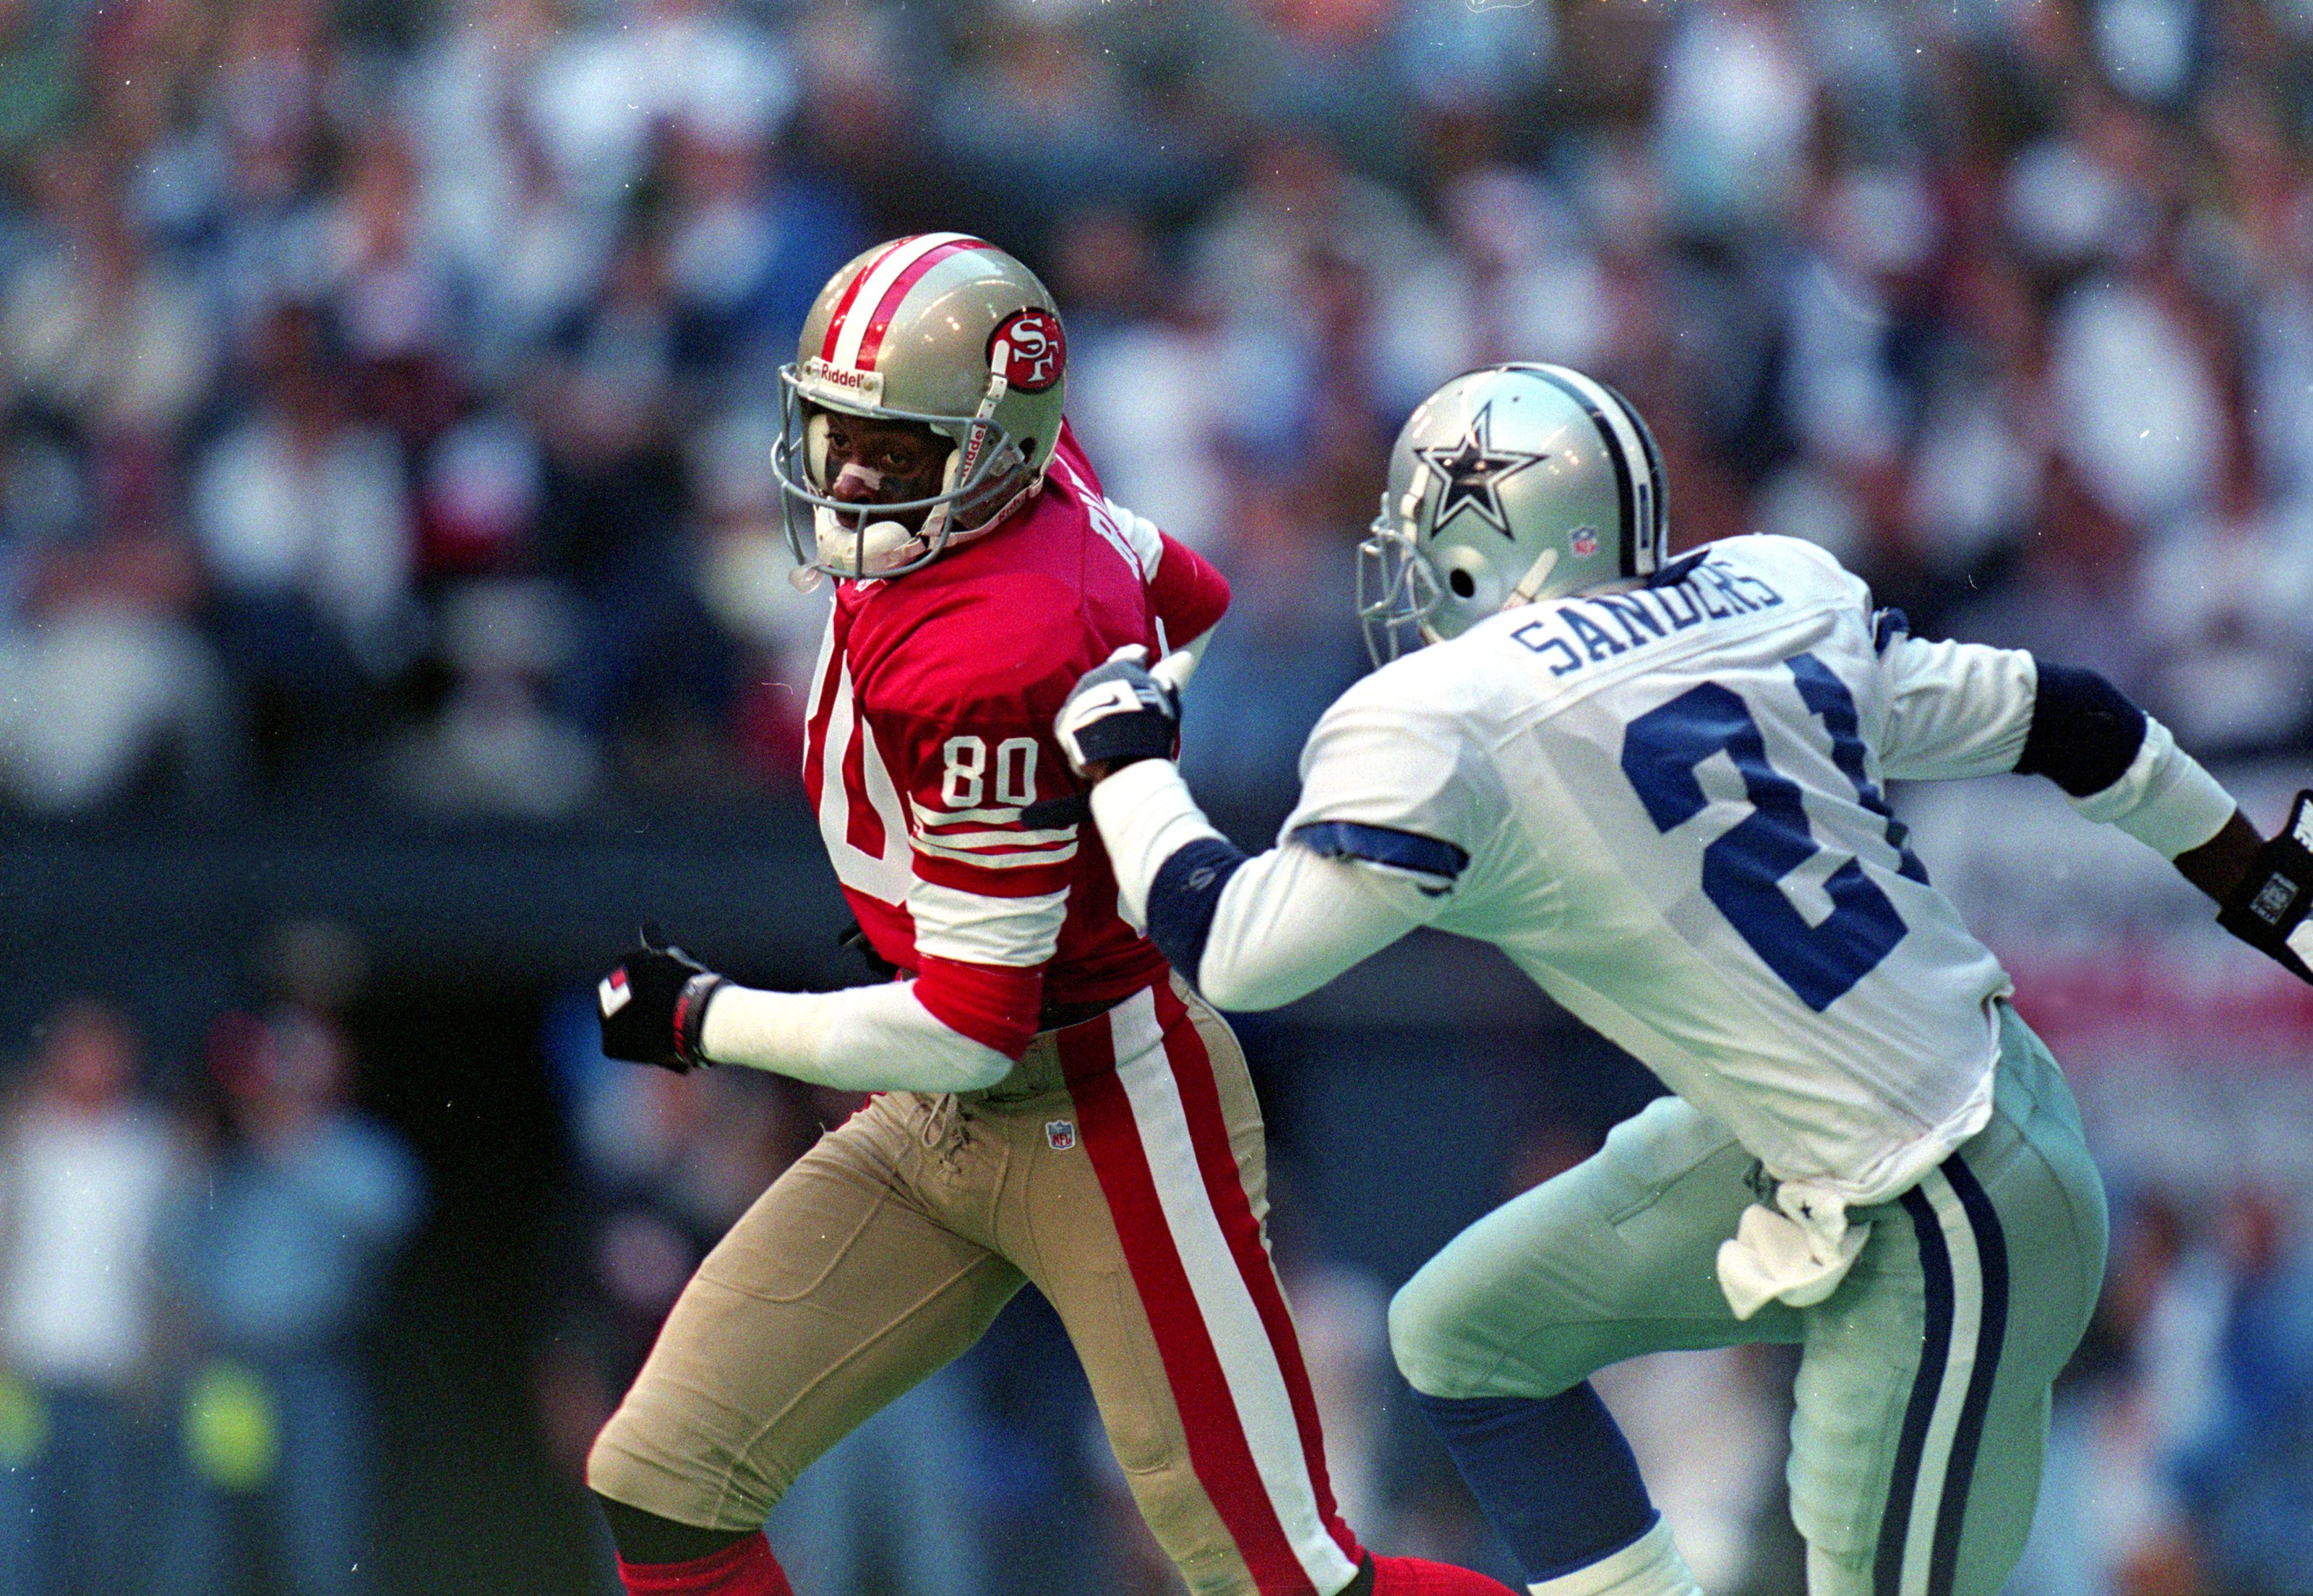 12 Nov 1995: Jerry Rice #80 of the San Francisco 49ers runs with the ball as Deion Sanders #21 of the Dallas Cowboys runs after him during the game at the Texas Stadium in Irving, Texas. The 49ers defeated the Cowboys 38-20.